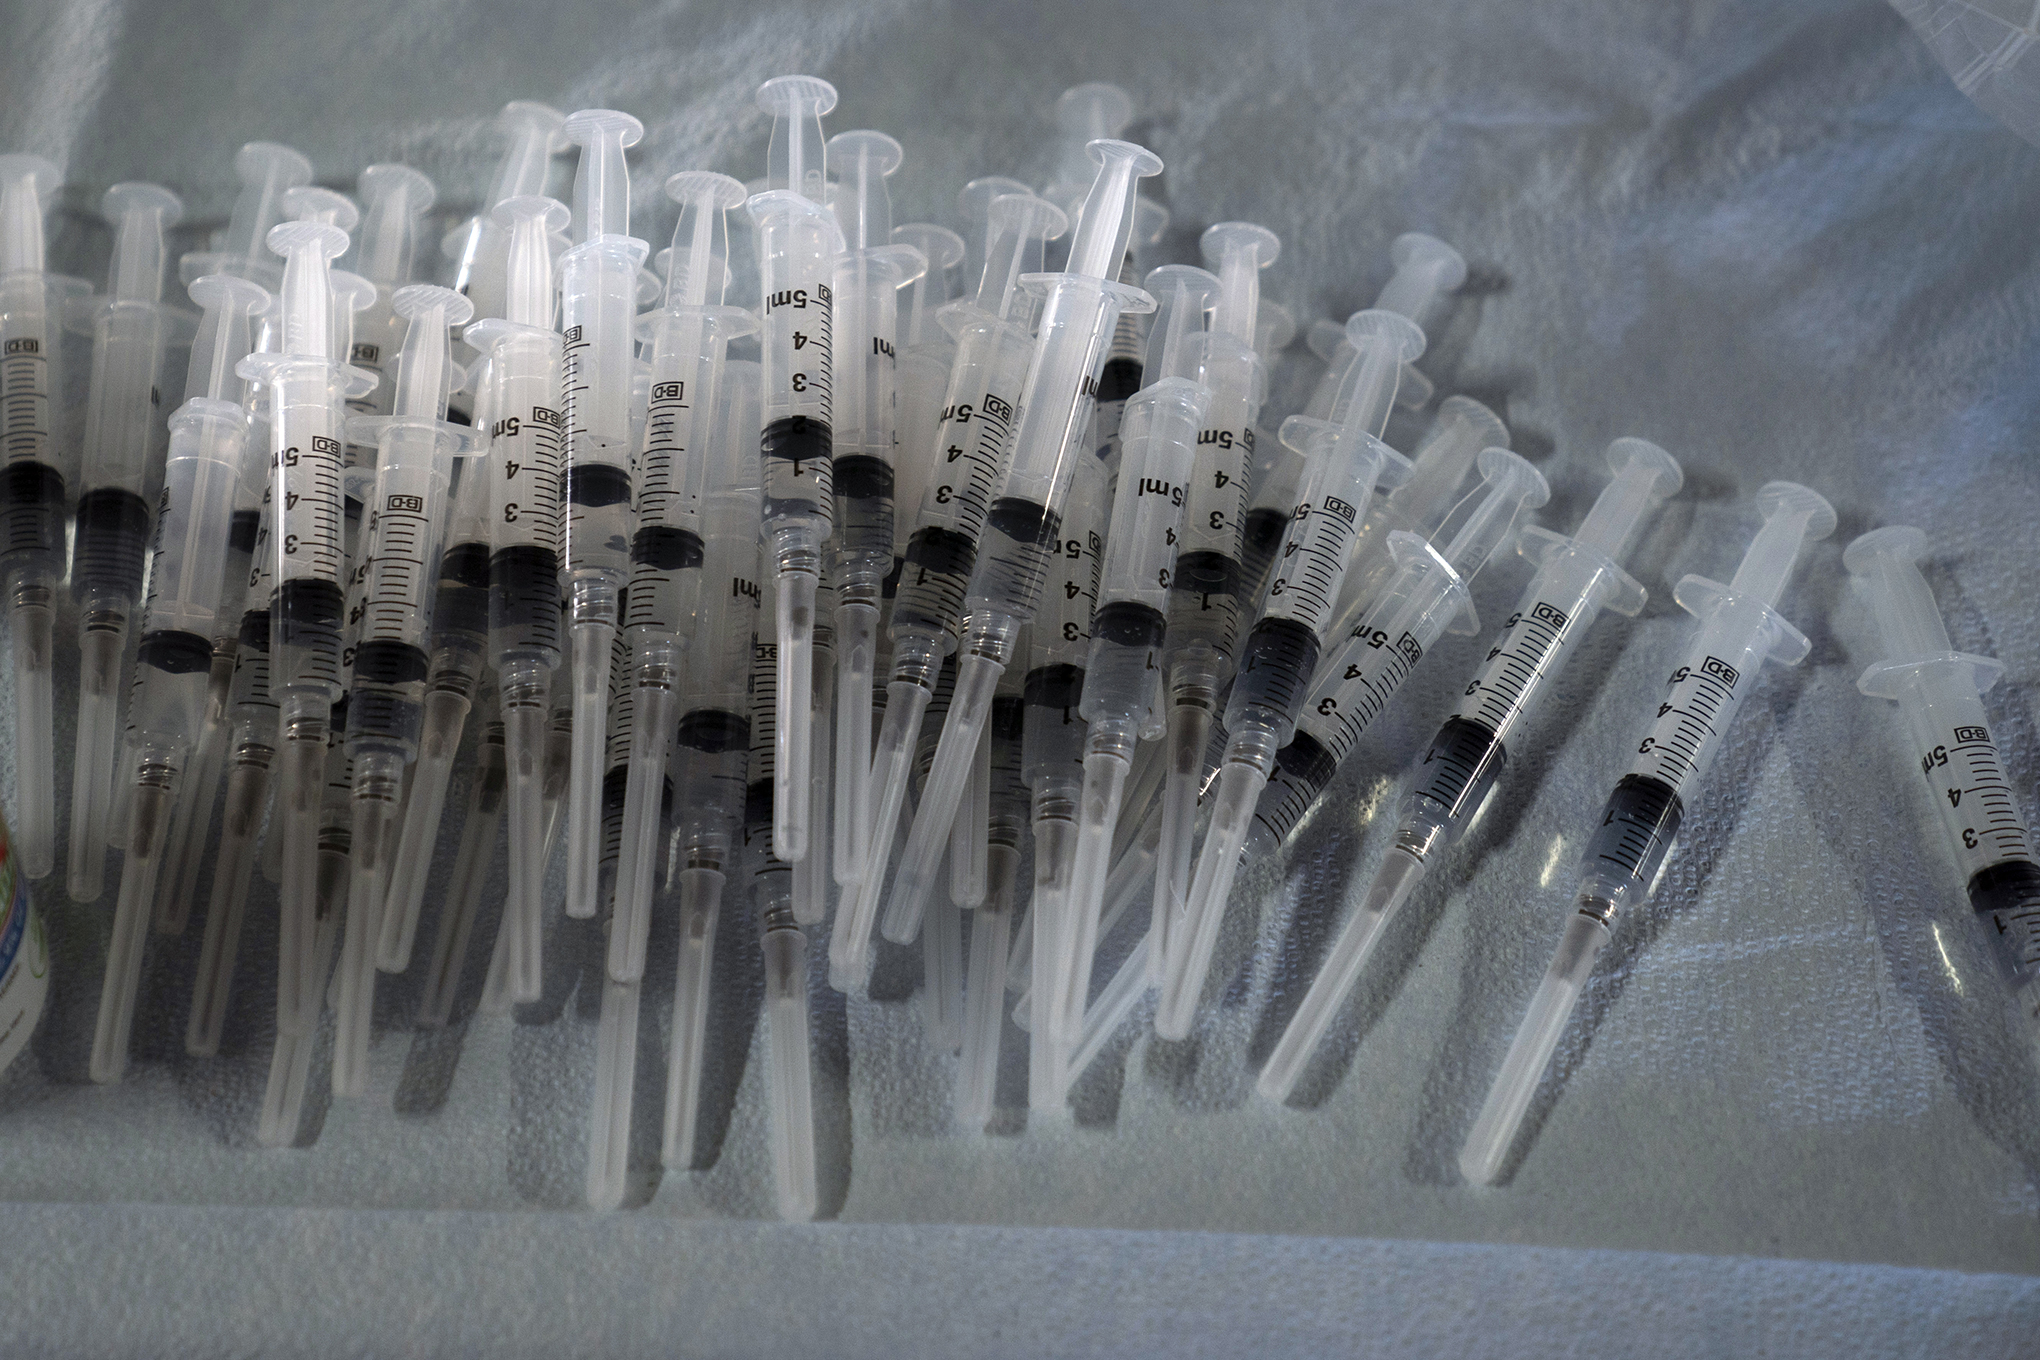 Syringes prepared with Pfizer's COVID-19 vaccine